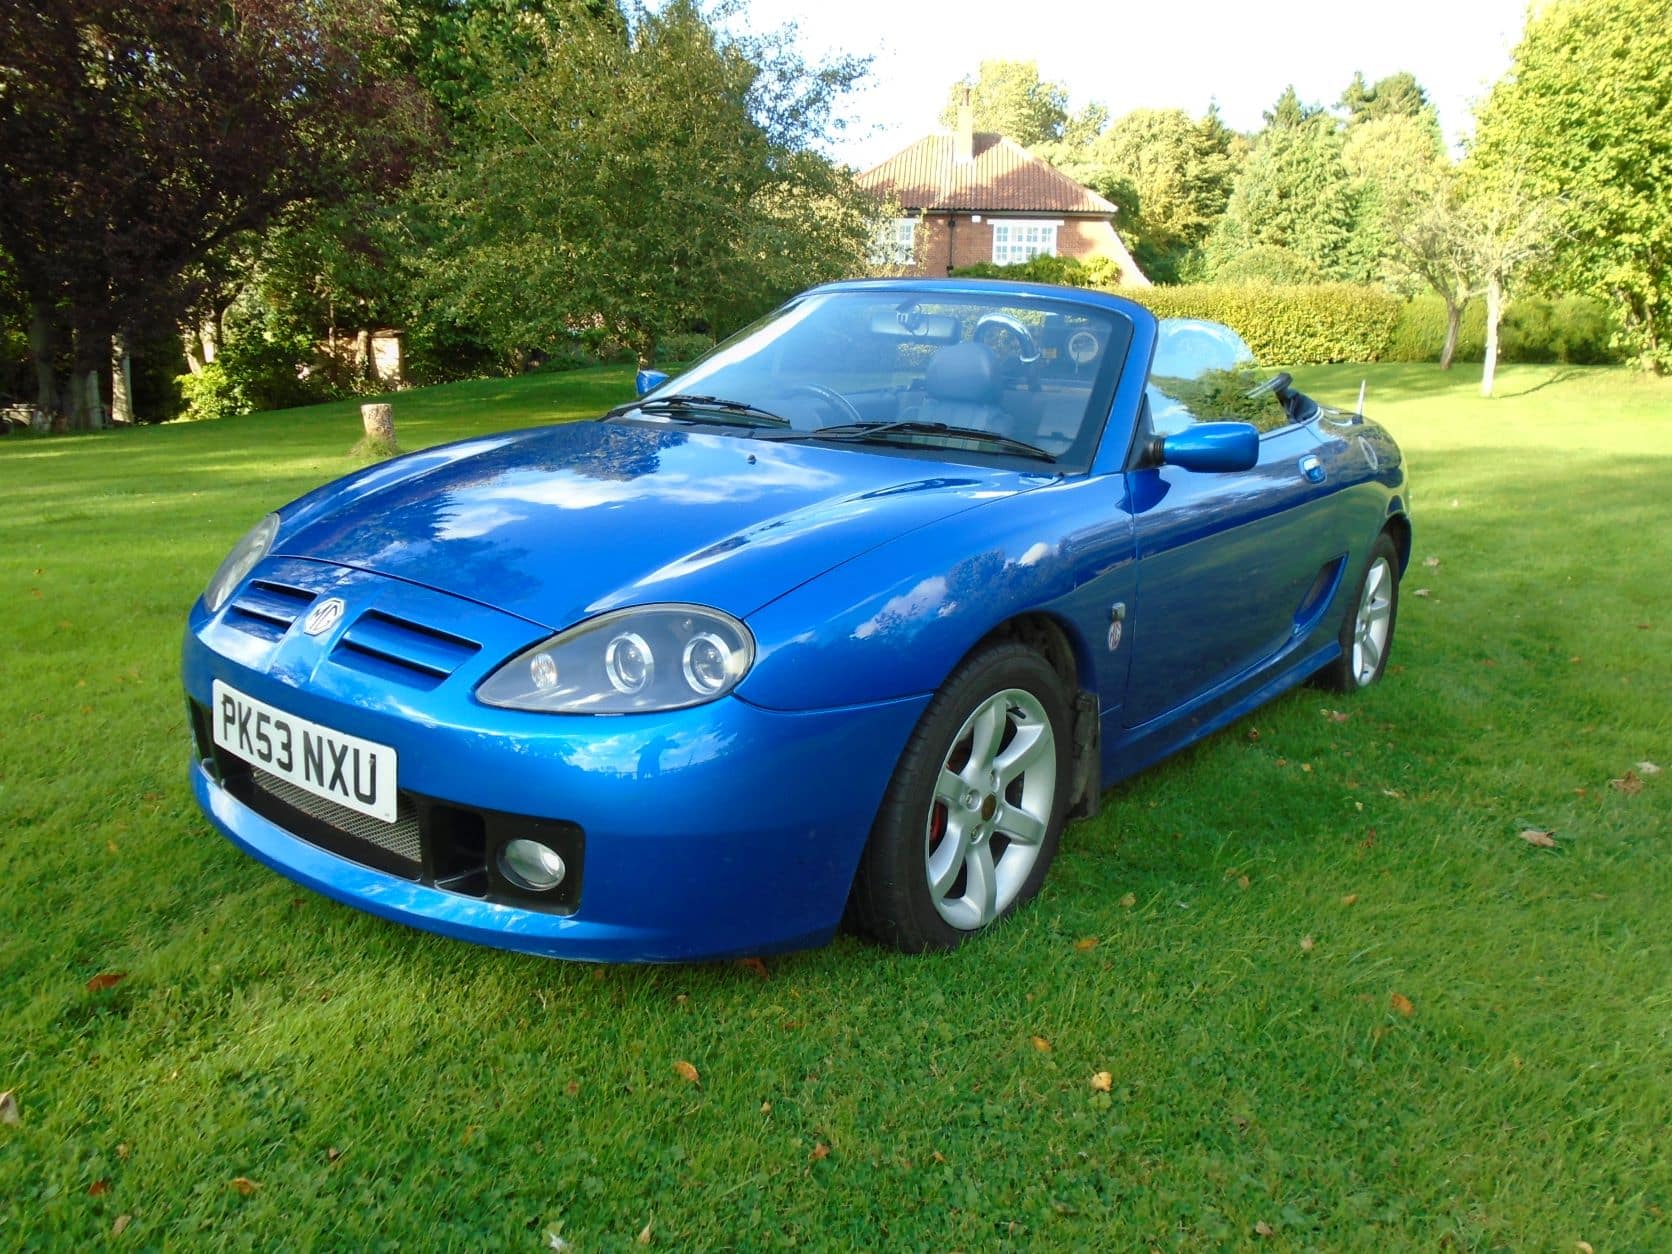 MG TF 1.8 (135) 2003 for Sale